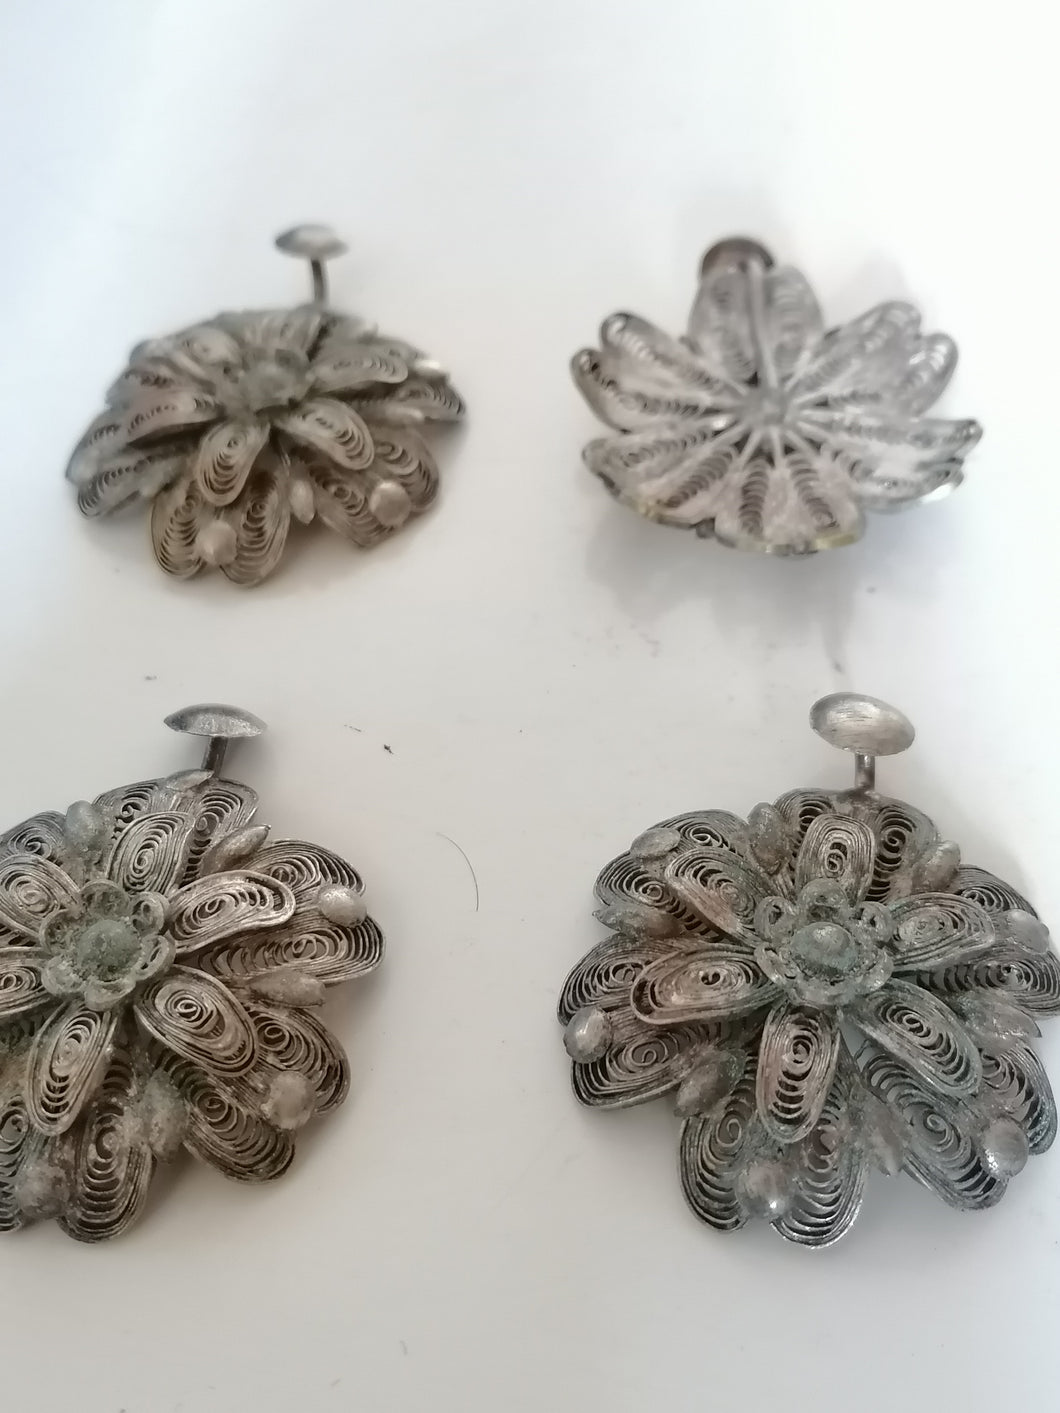 4 broches bouton, costume traditionnel Suisse